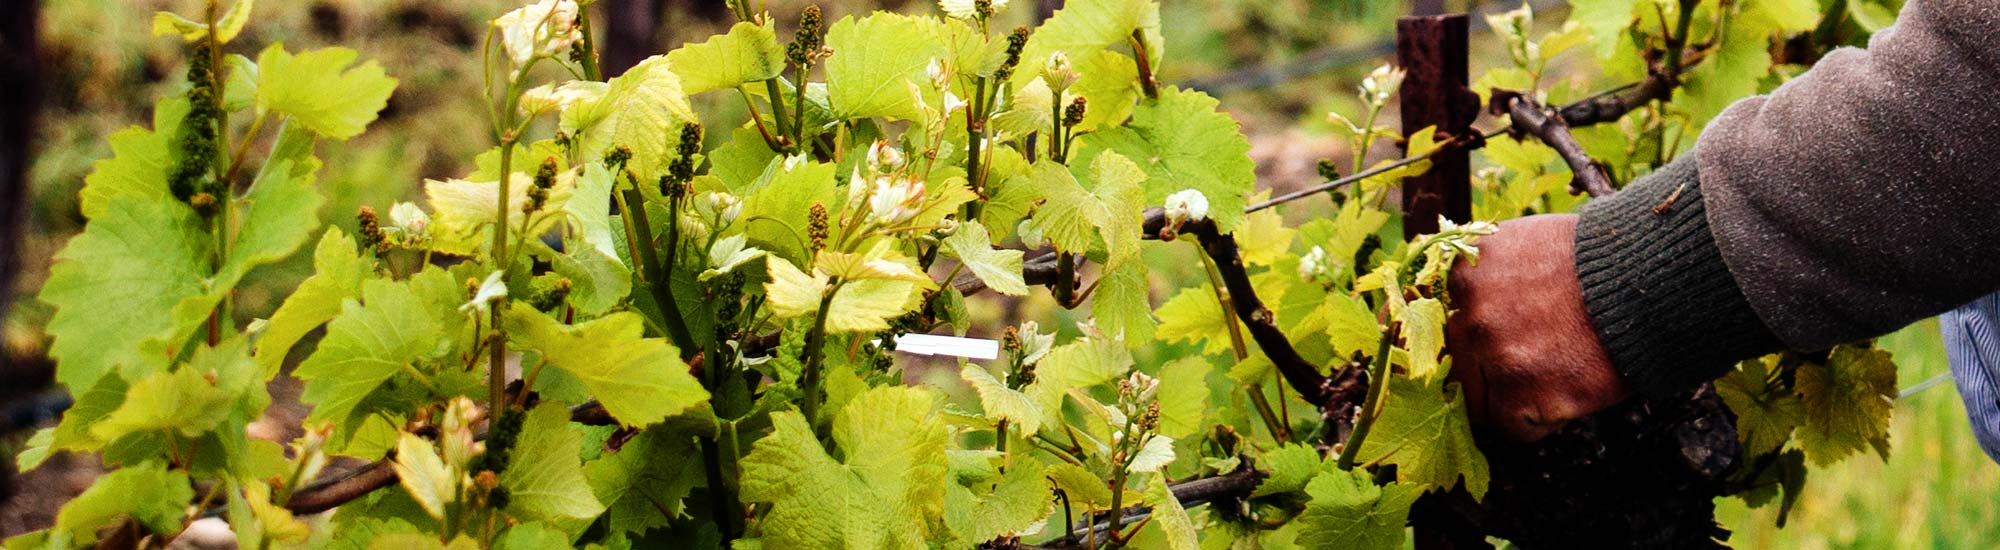 Research Shows the Trade Want Sustainable Wines